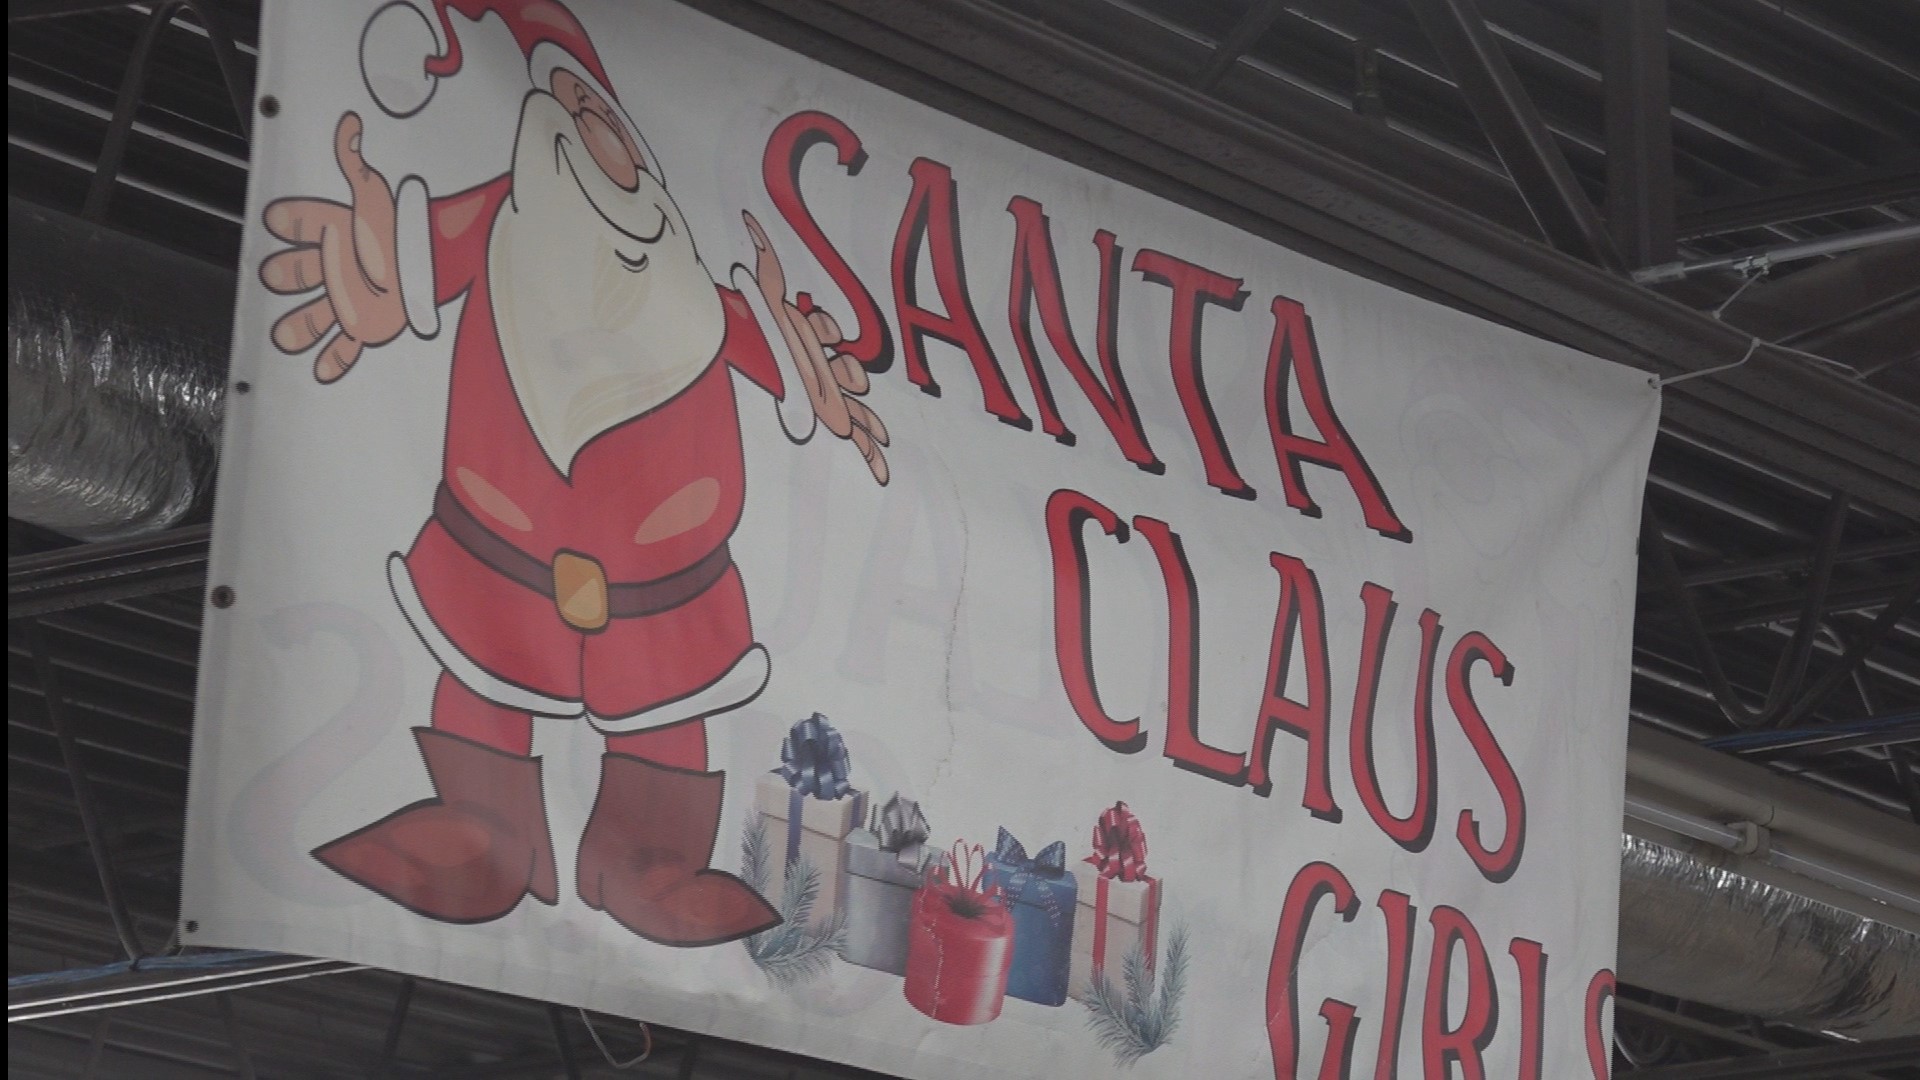 For Rebekah Burris, she dedicated her Saturday morning to driving presents for The Santa Claus Girls.